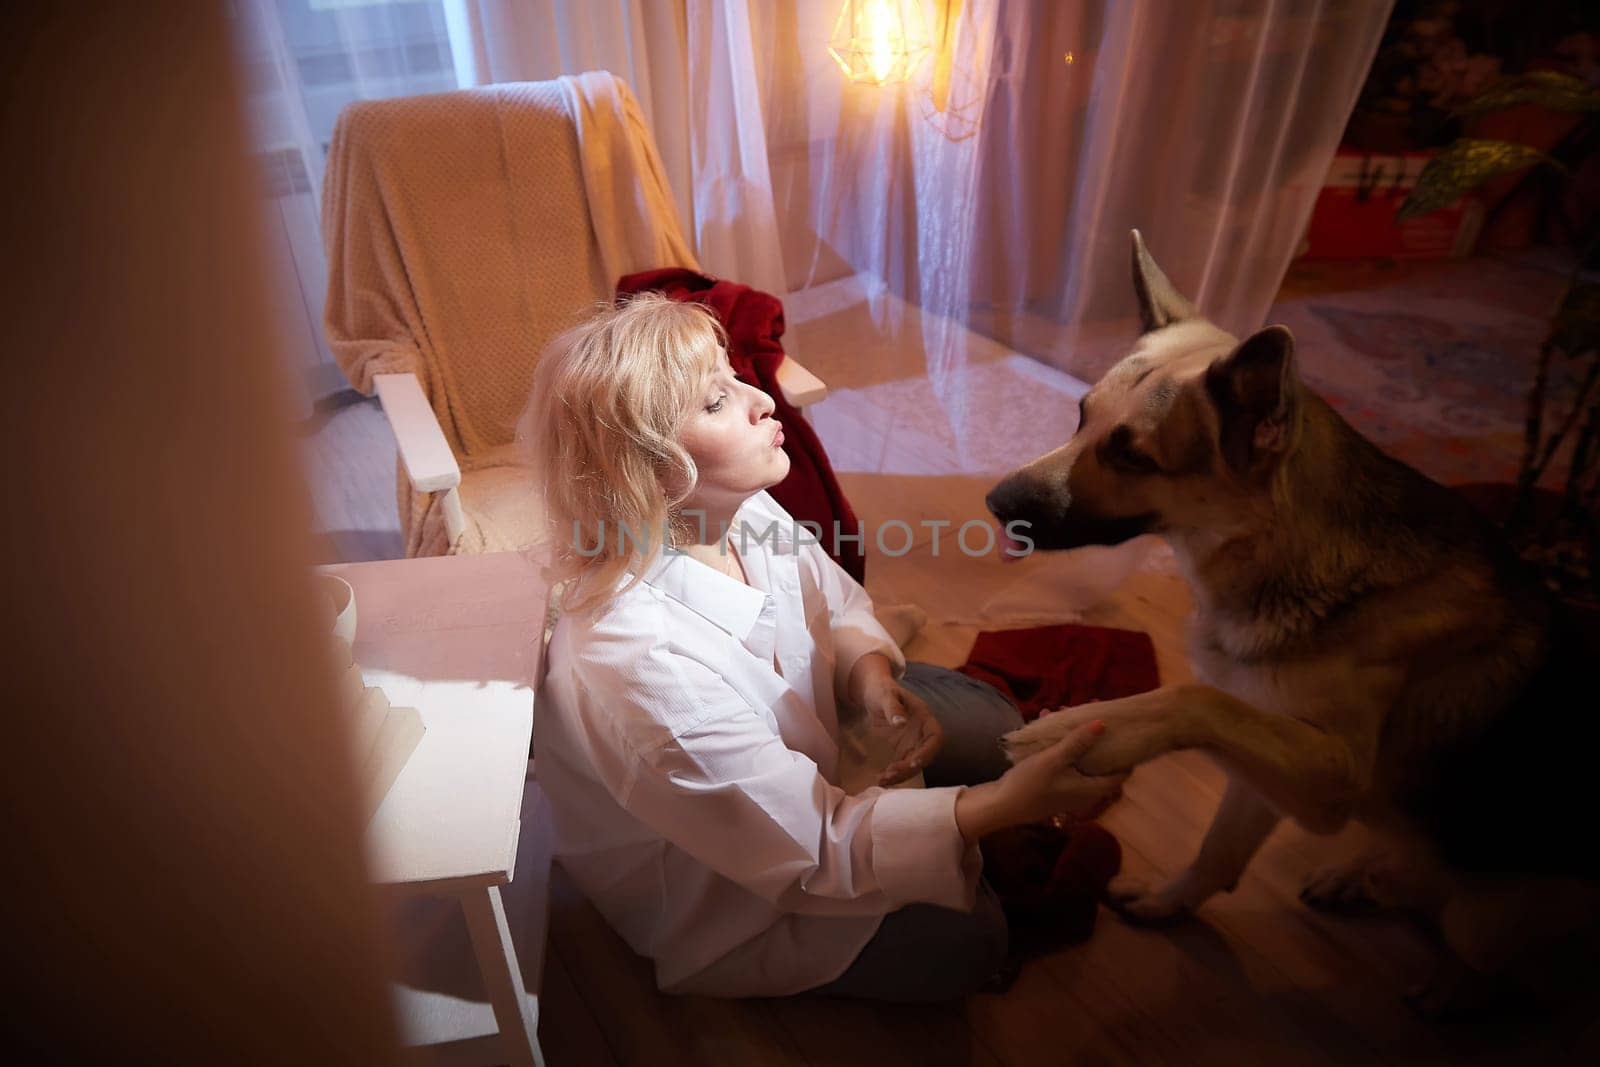 Adult mature woman of 40-60 with big shepherd dog in white shirt. Room with calm cozy evening atmosphere with transparent curtains and soft warm light of lamps. Concept of love for animals and pet